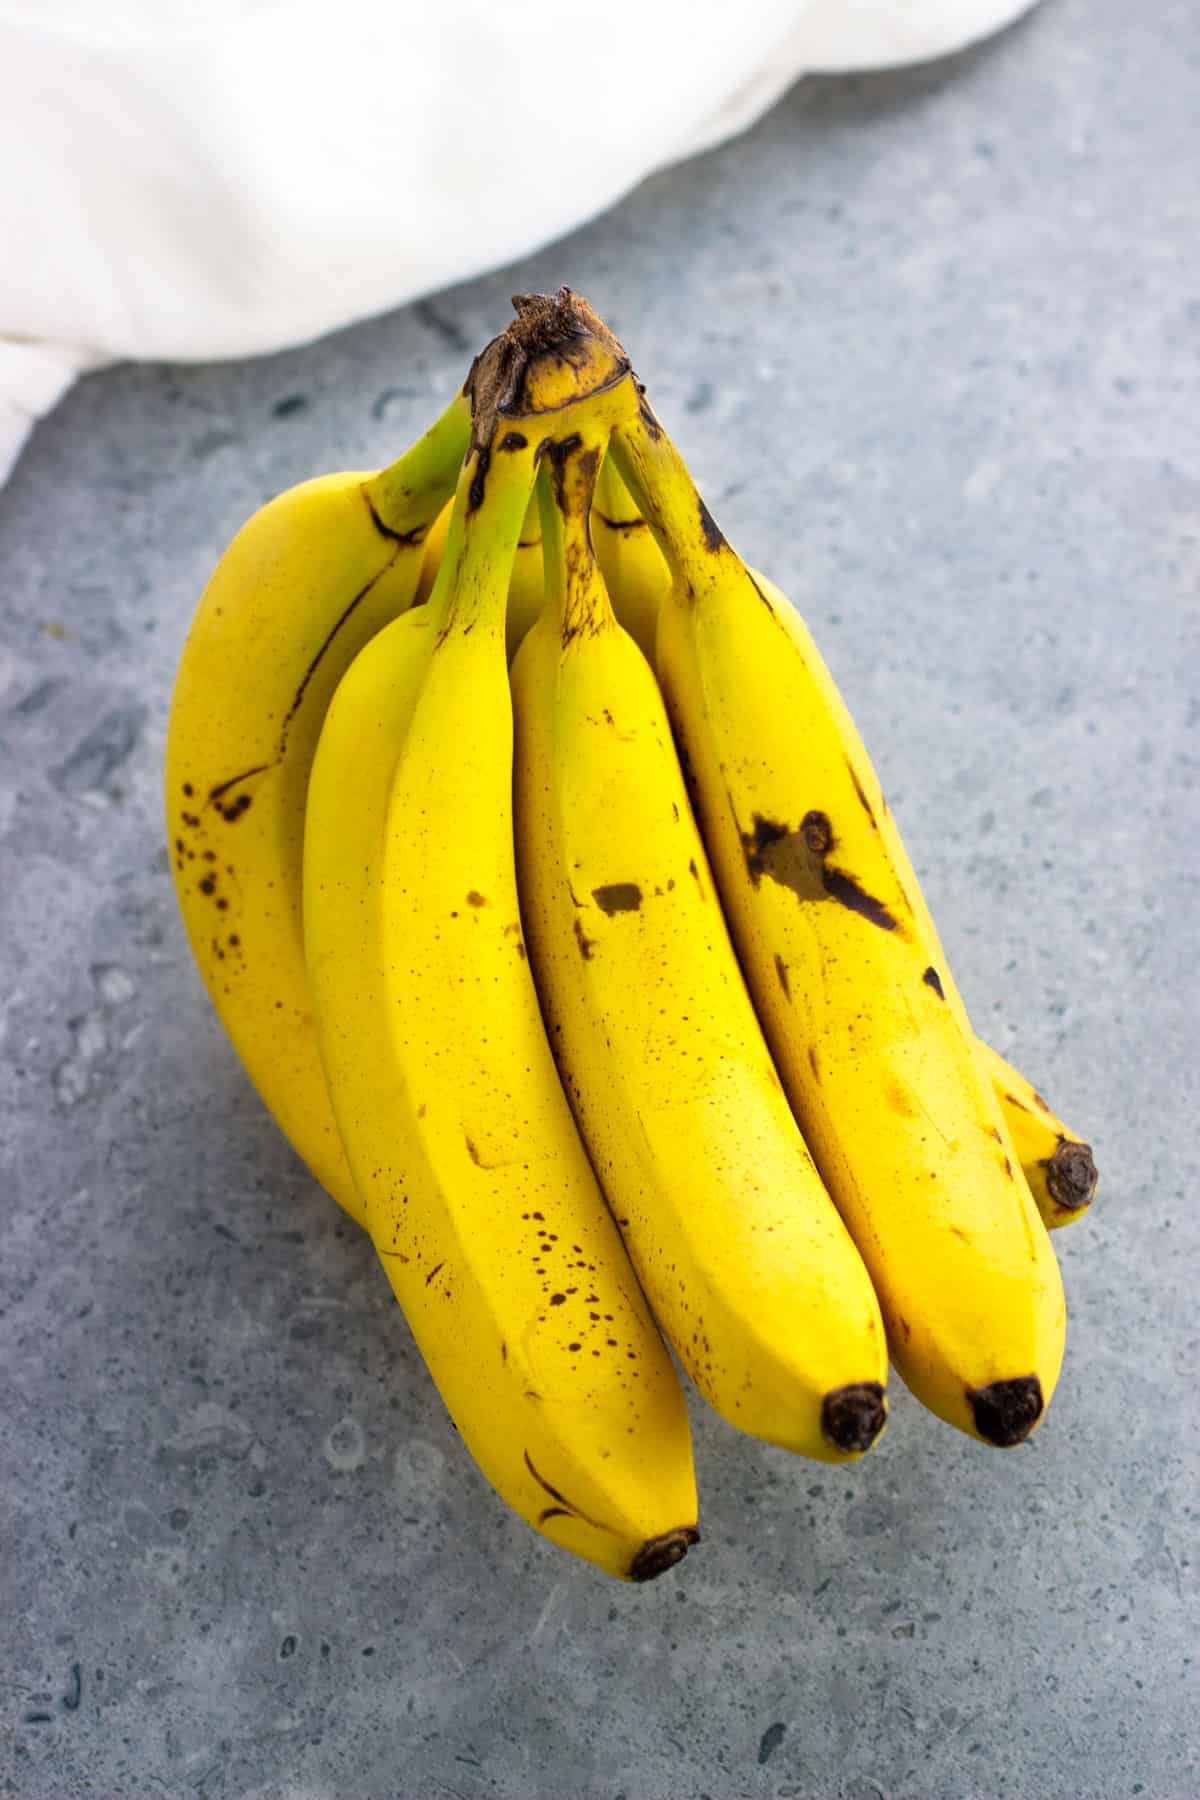 A bunch of fairly ripe bananas.